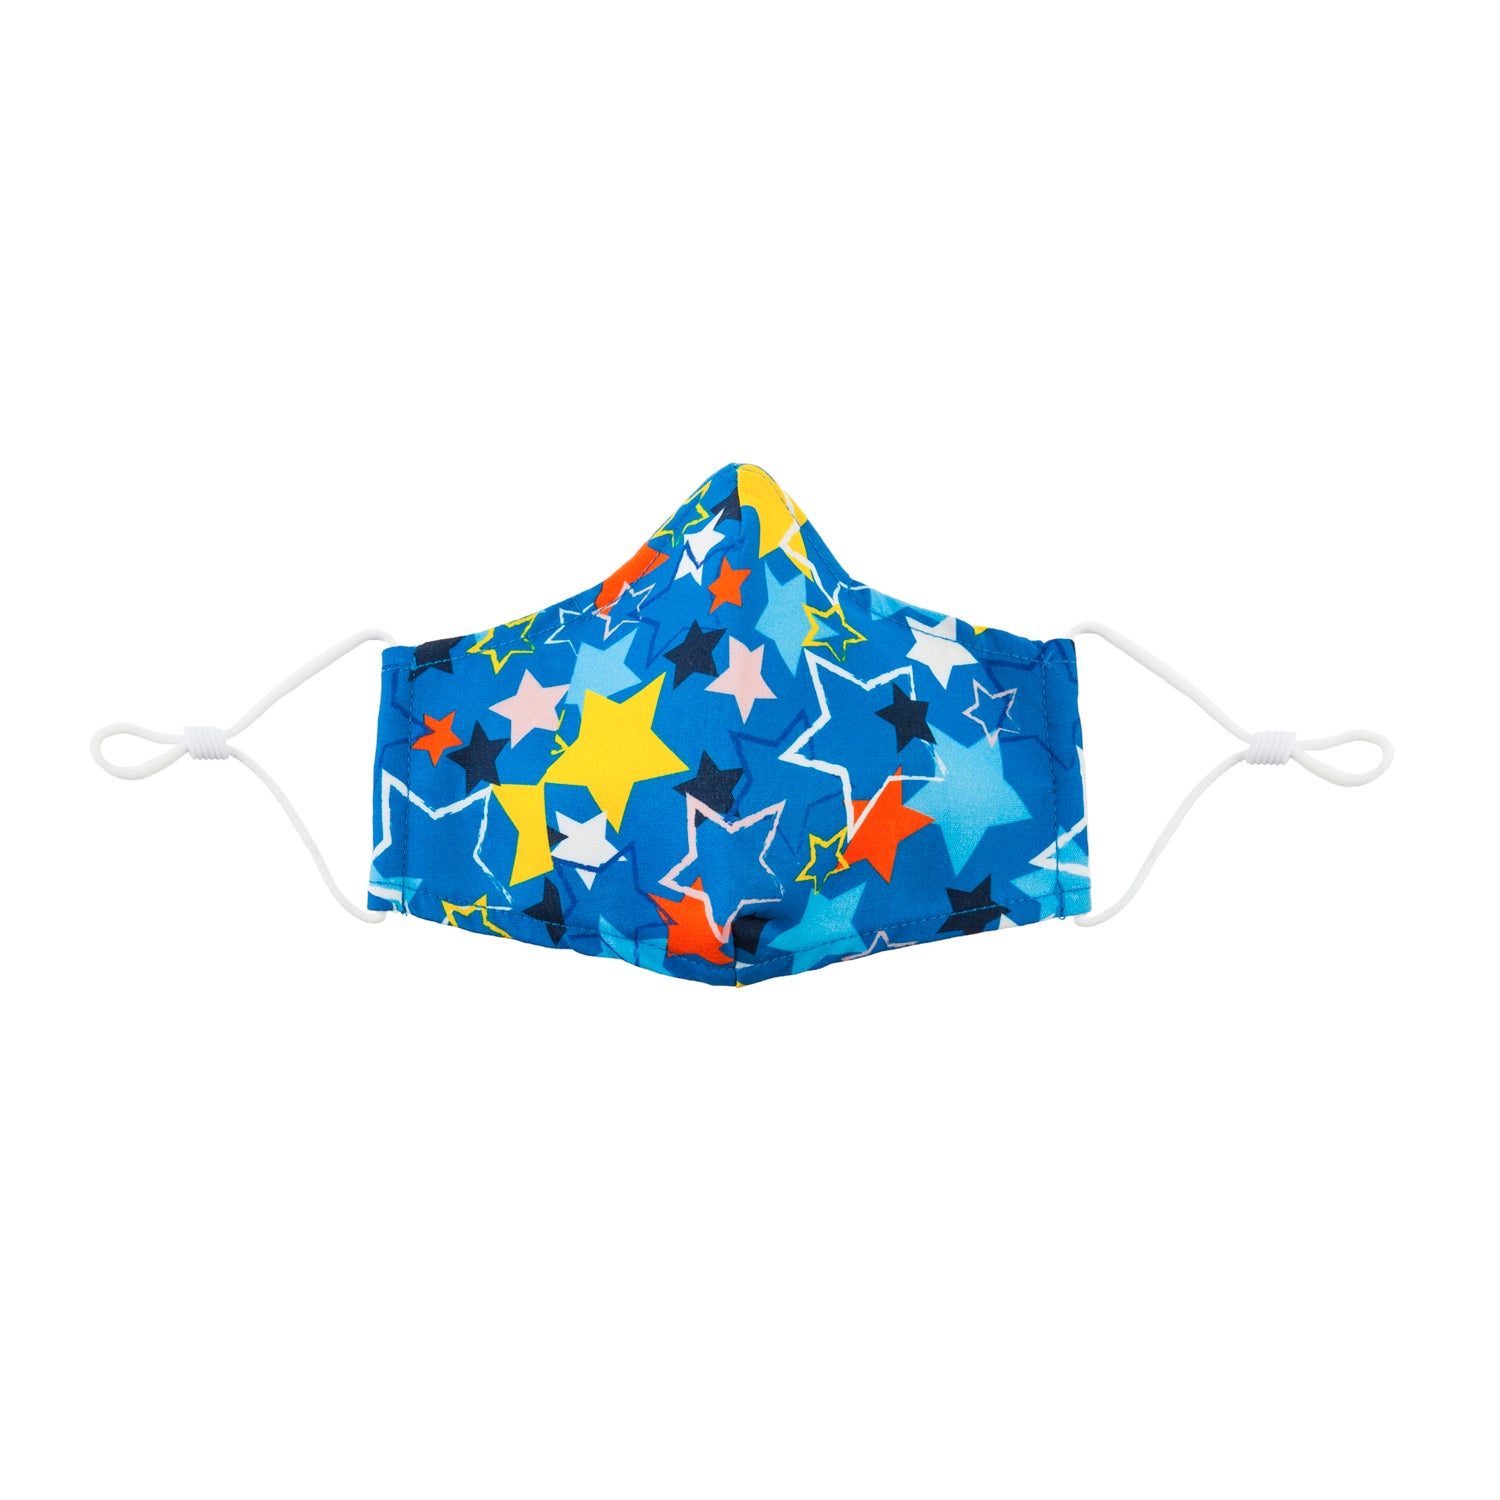 Children's Non-Medical Cotton Face Mask Set of 2 with Star Pattern